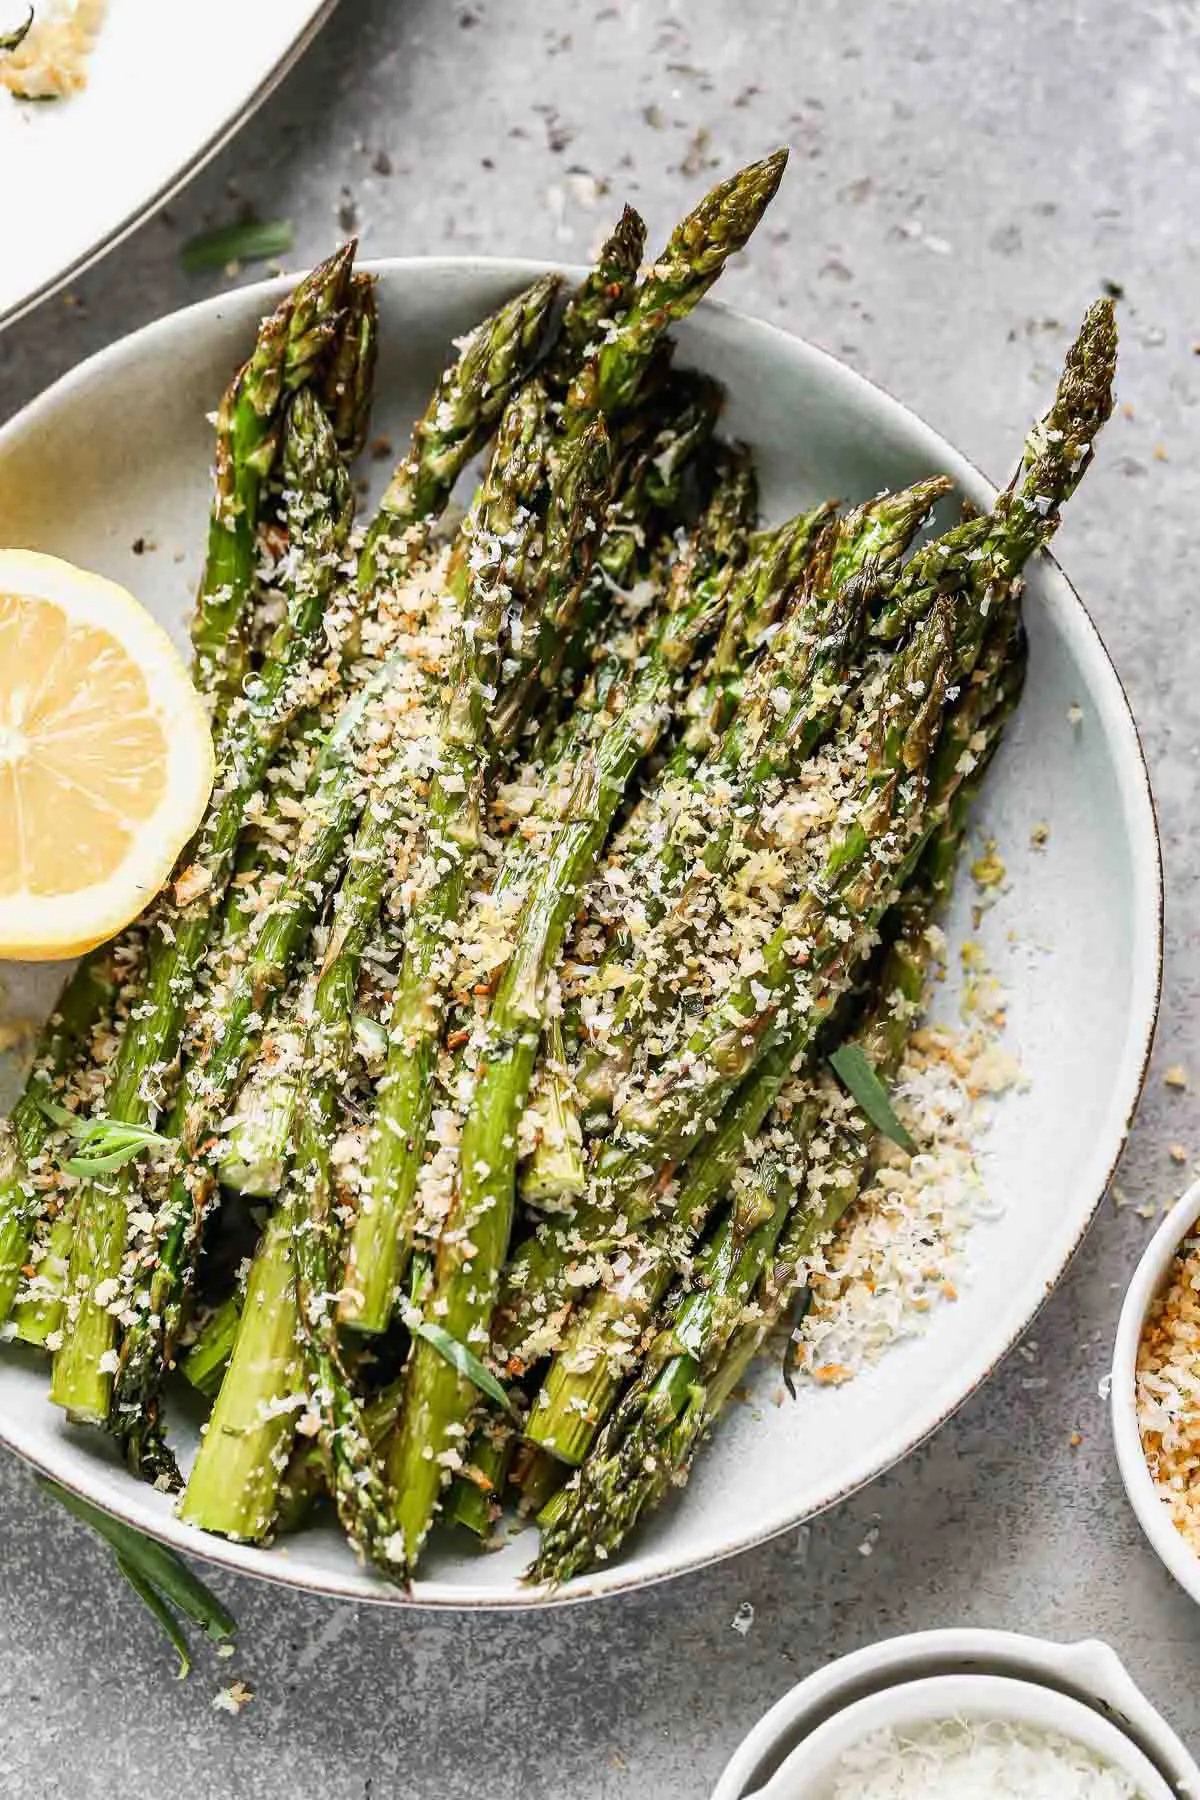 Tender and crispy on the outside with a slight bite on the inside, and covered in cheesy garlicky breadcrumbs (with hints of lemon!), our Easy Roasted Asparagus with Breadcrumbs is the perfect way to up your roasted veggie game this spring. Make a double or triple batch to feed a crowd, or scale it back to feed a family of four.&nbsp;